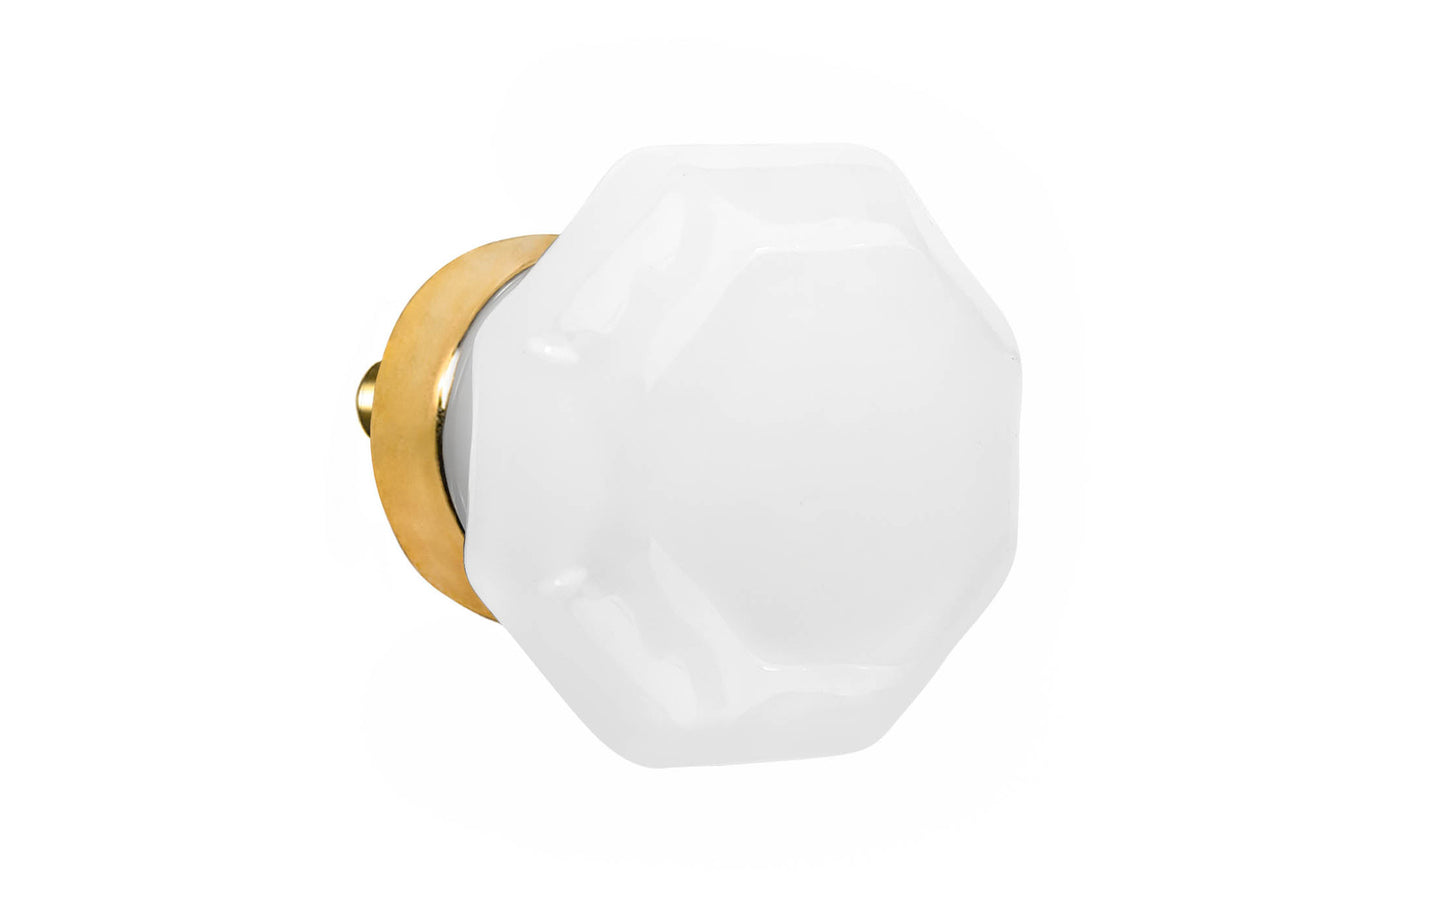 Elegant & classic octagonal cabinet glass knob with an attractive "Translucent White Opal" color. The glass is carefully set into a handsome solid brass base with a threaded shank in the back. Unlacquered brass base - Will patina naturally over time. Octagon shape knob. 1-1/4" Diameter Knob 